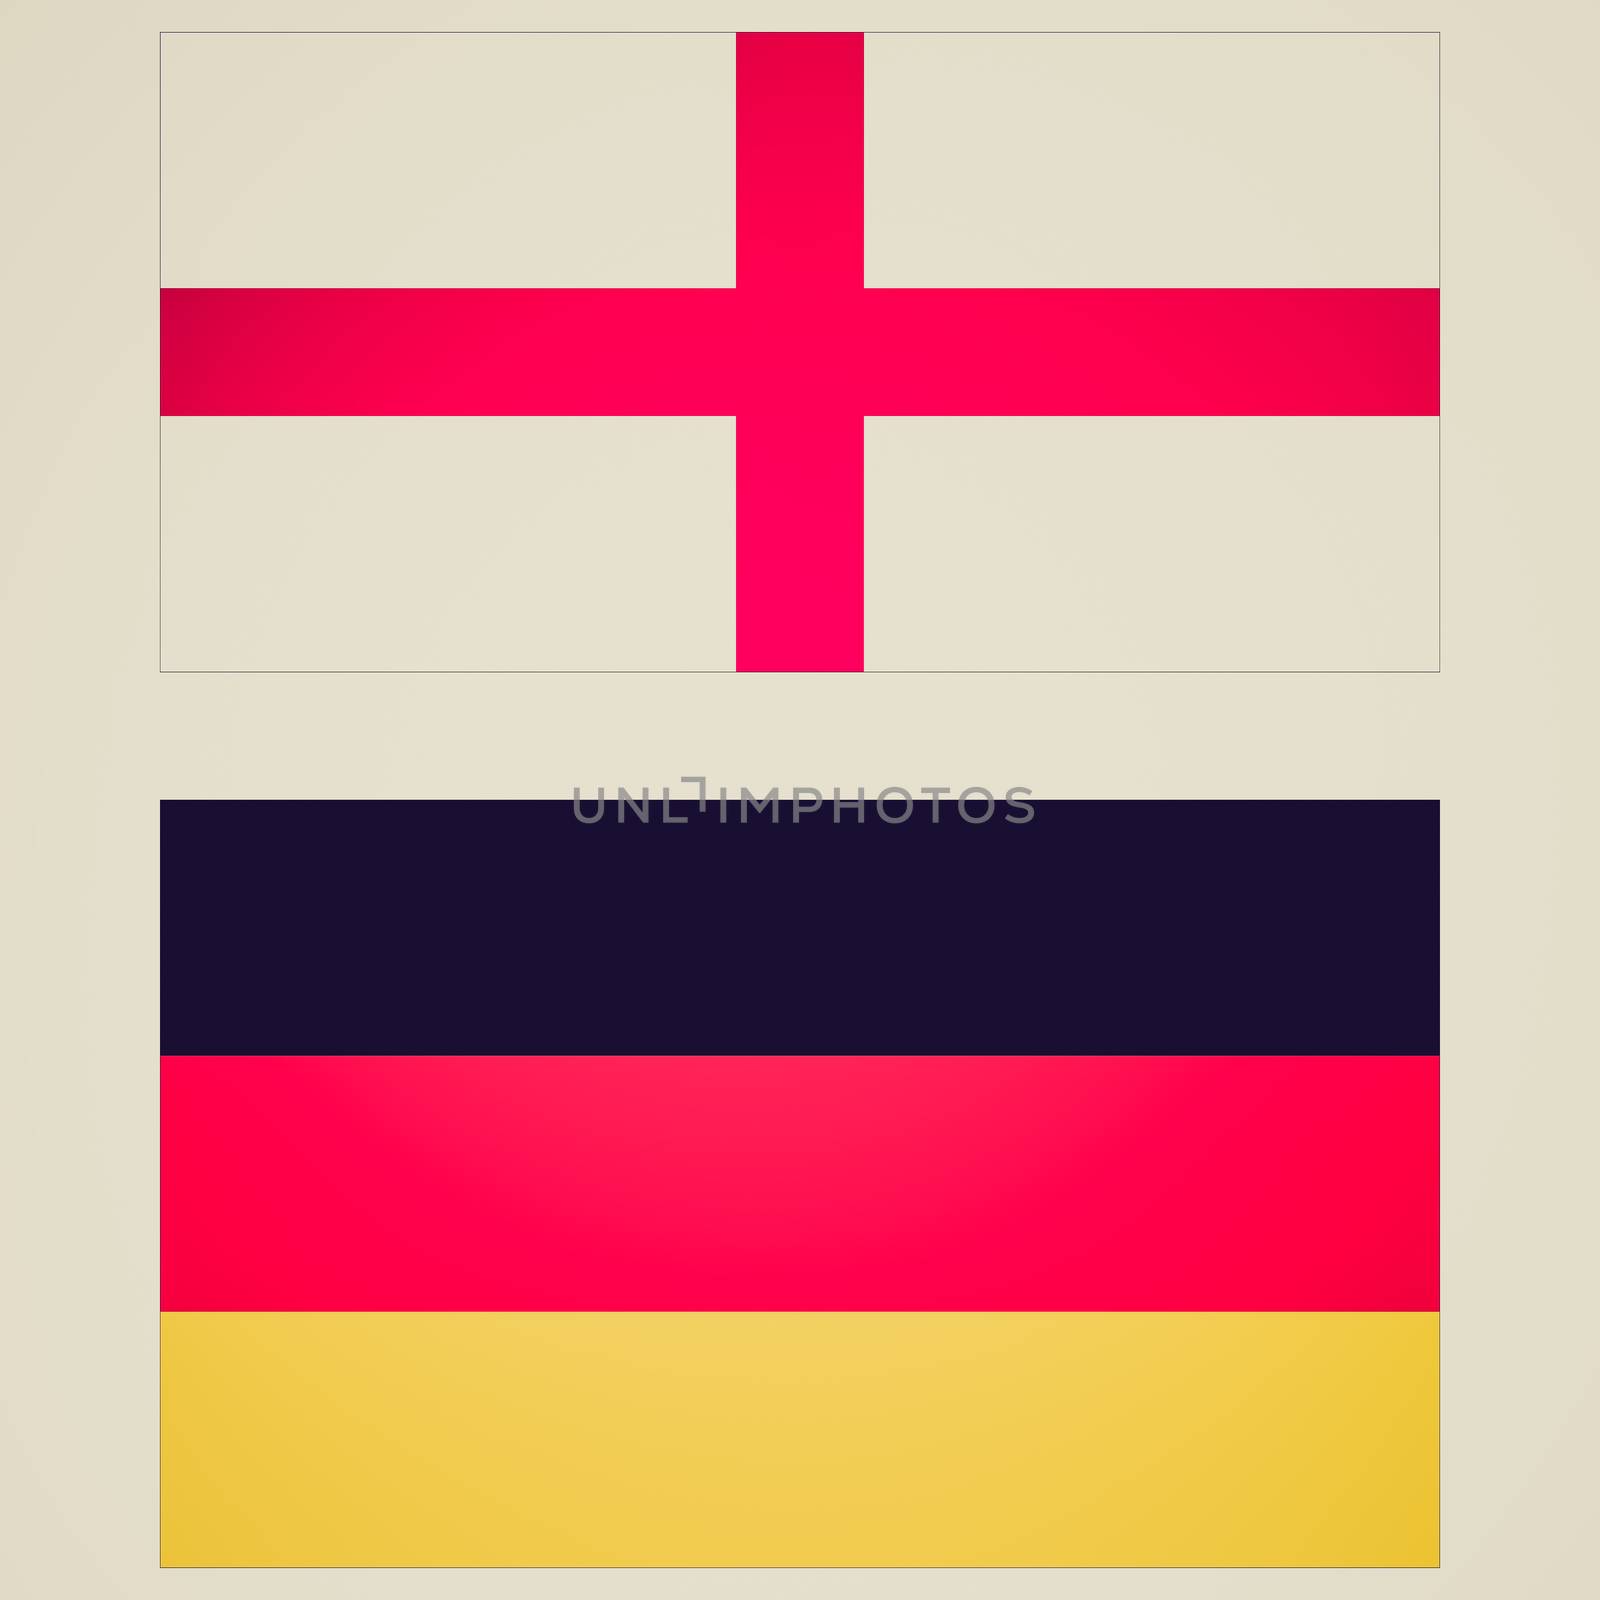 Retro looking England vs Germany - Flags of the two countries